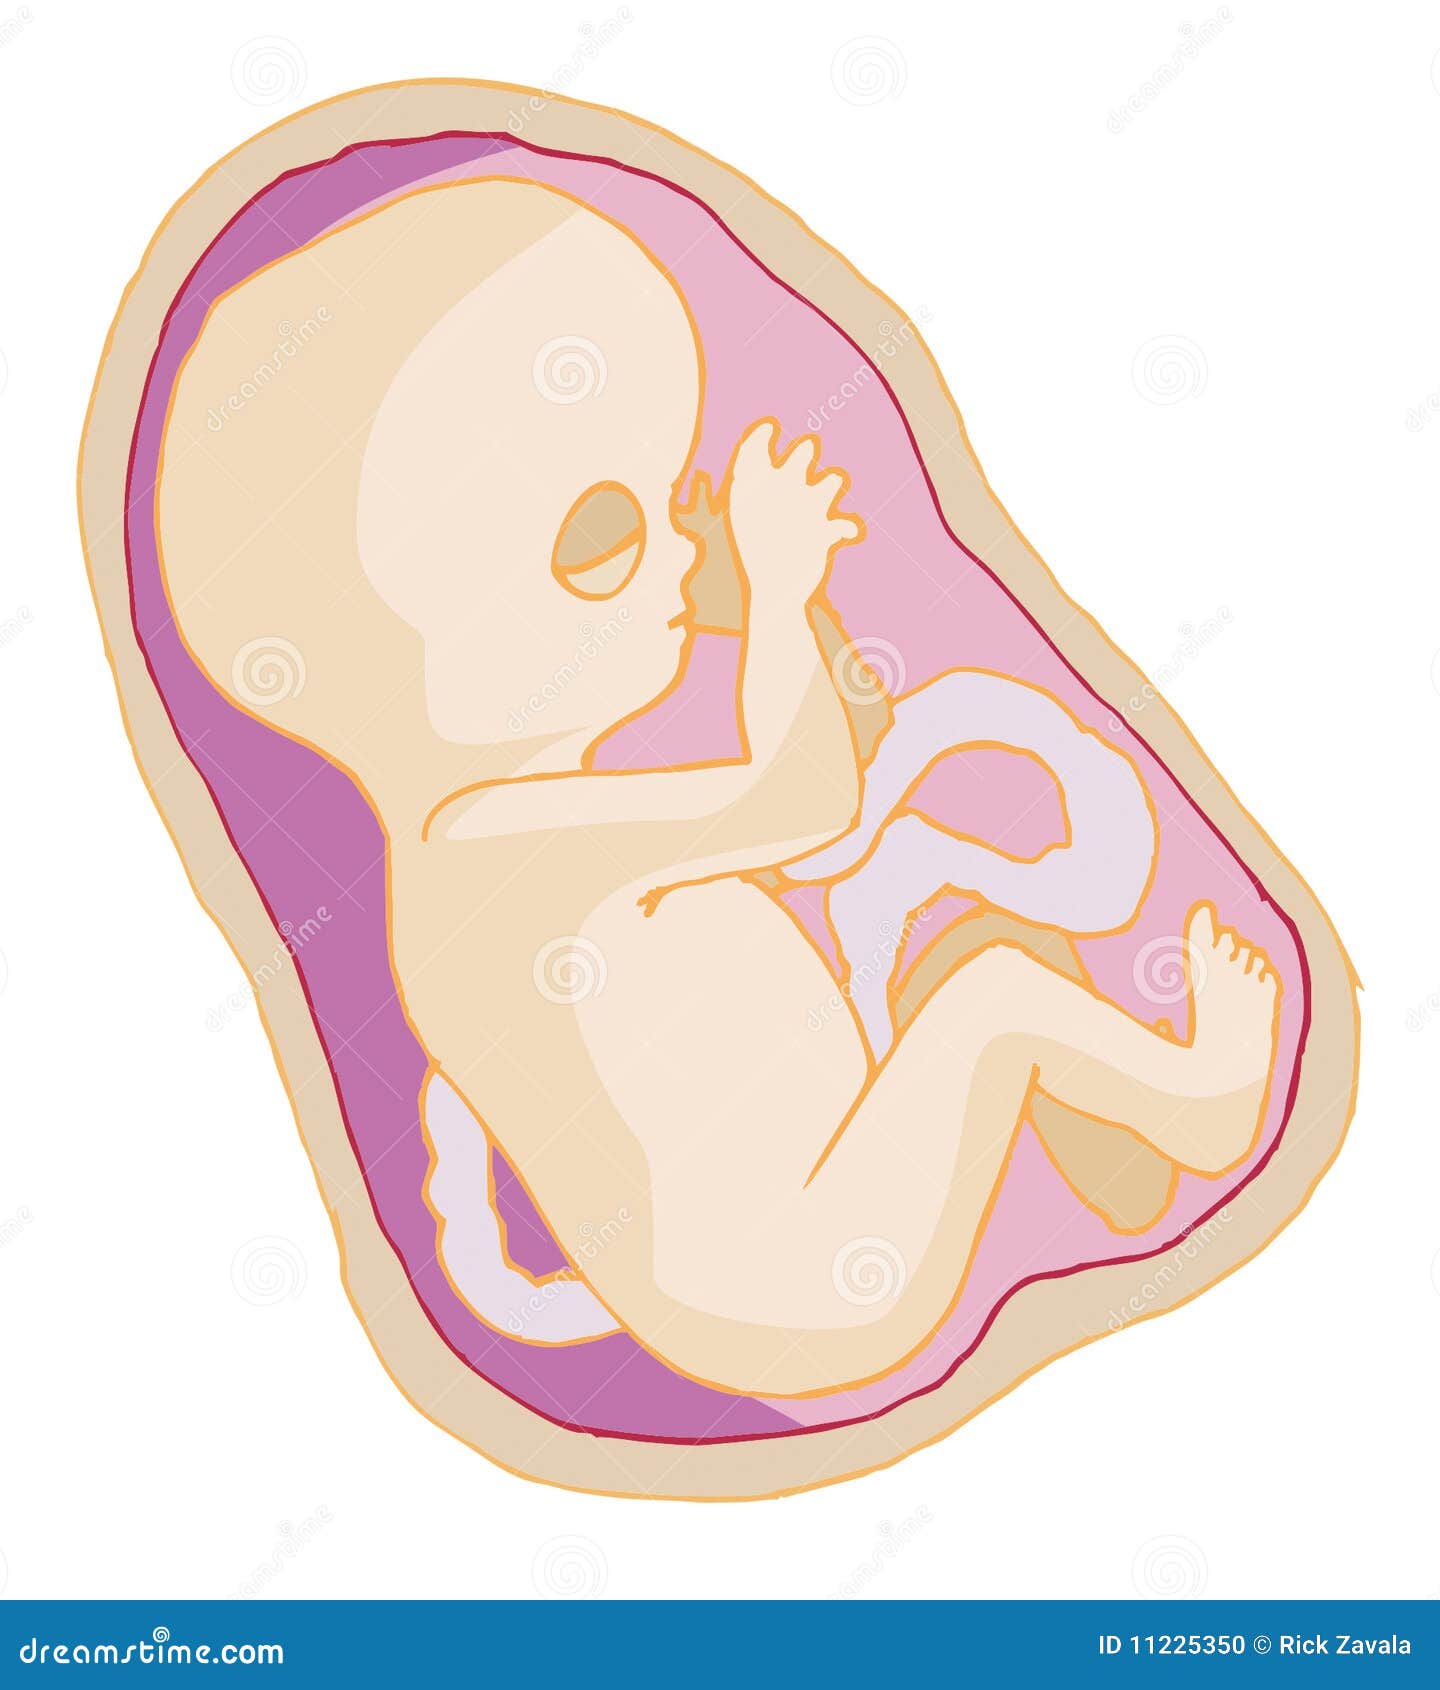 free clipart baby in womb - photo #29